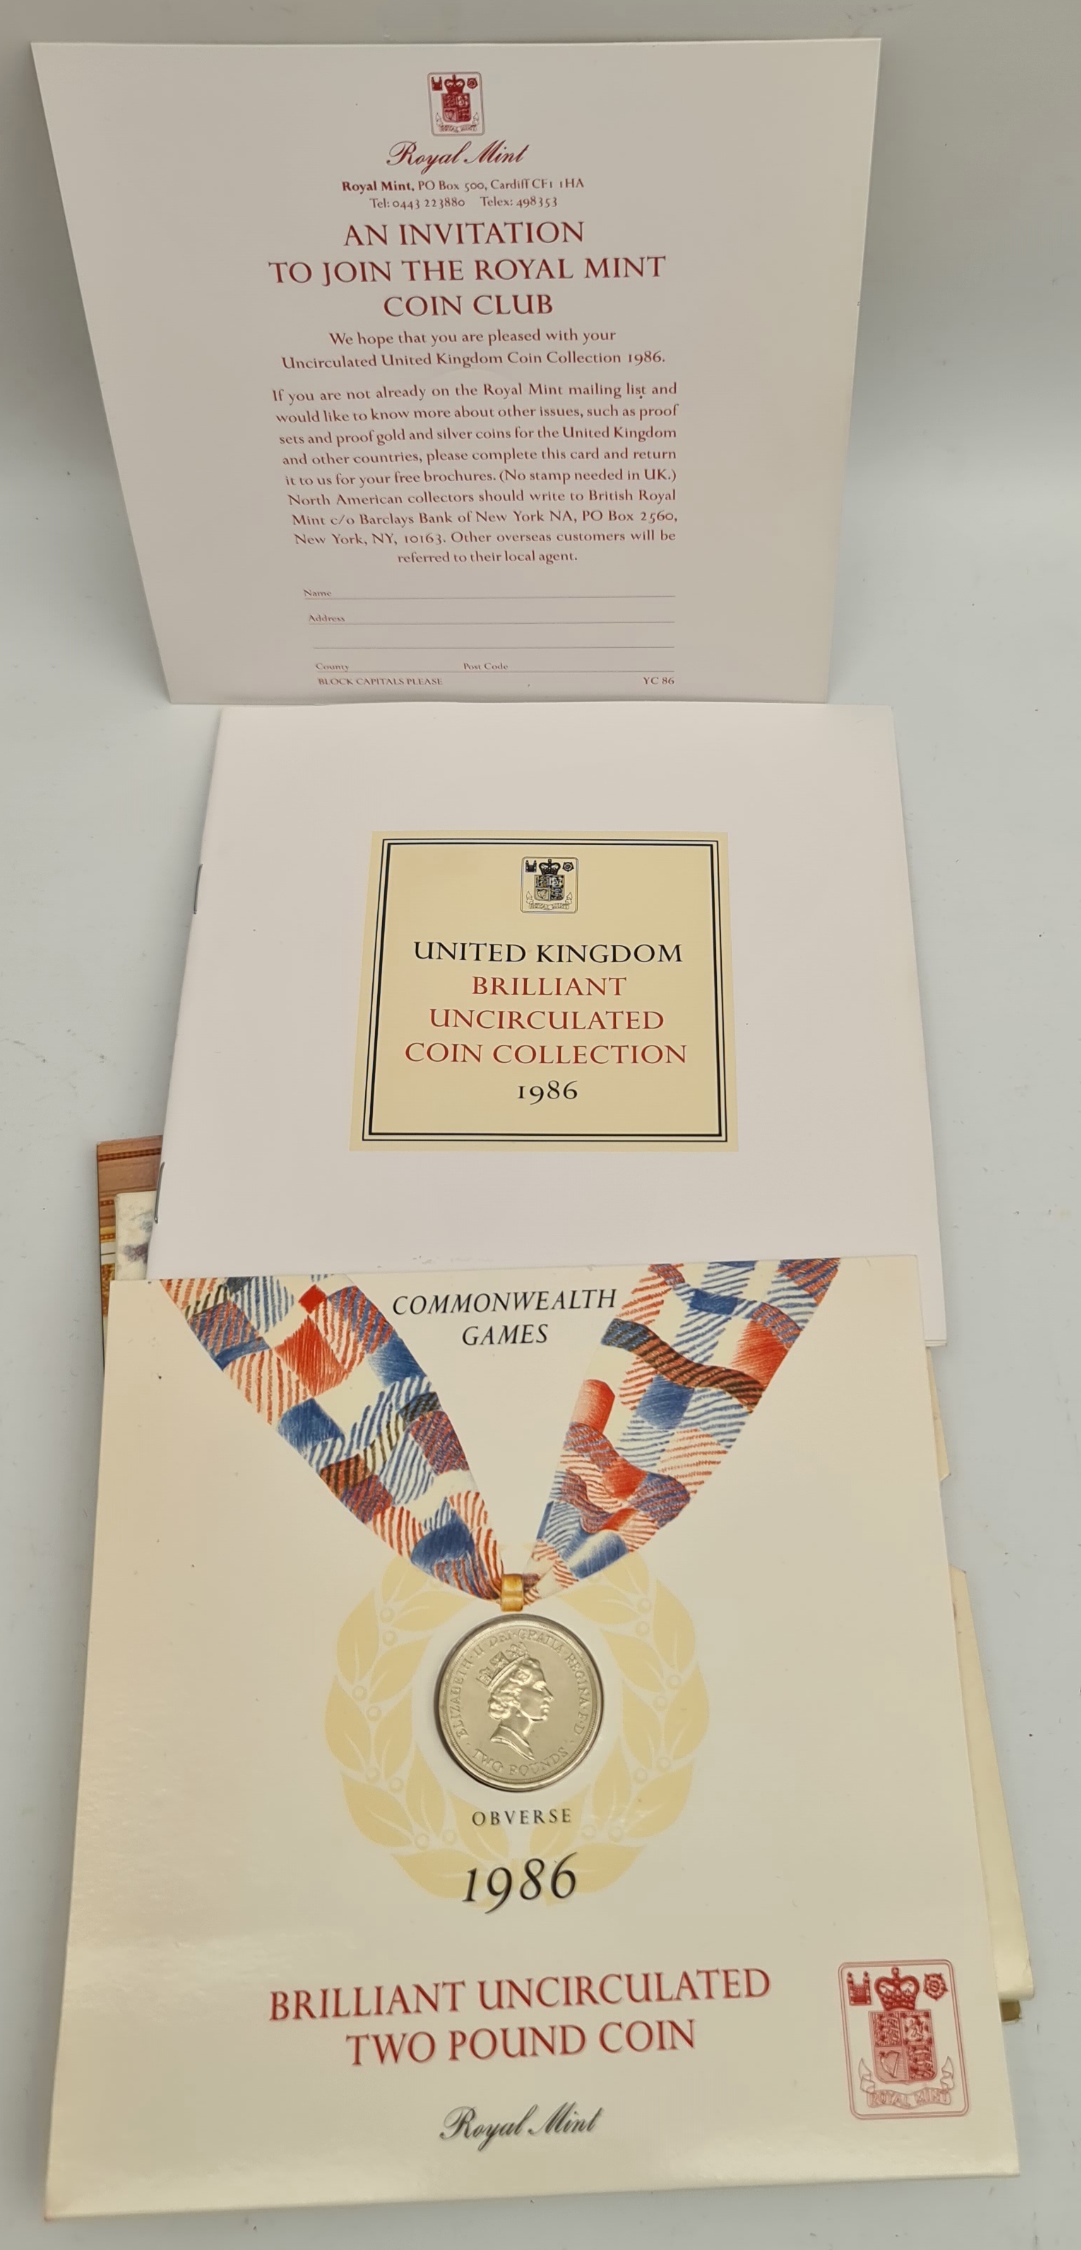 Coins 1986 Commonwealth Games & Buckingham Palace 2001 - Image 2 of 3